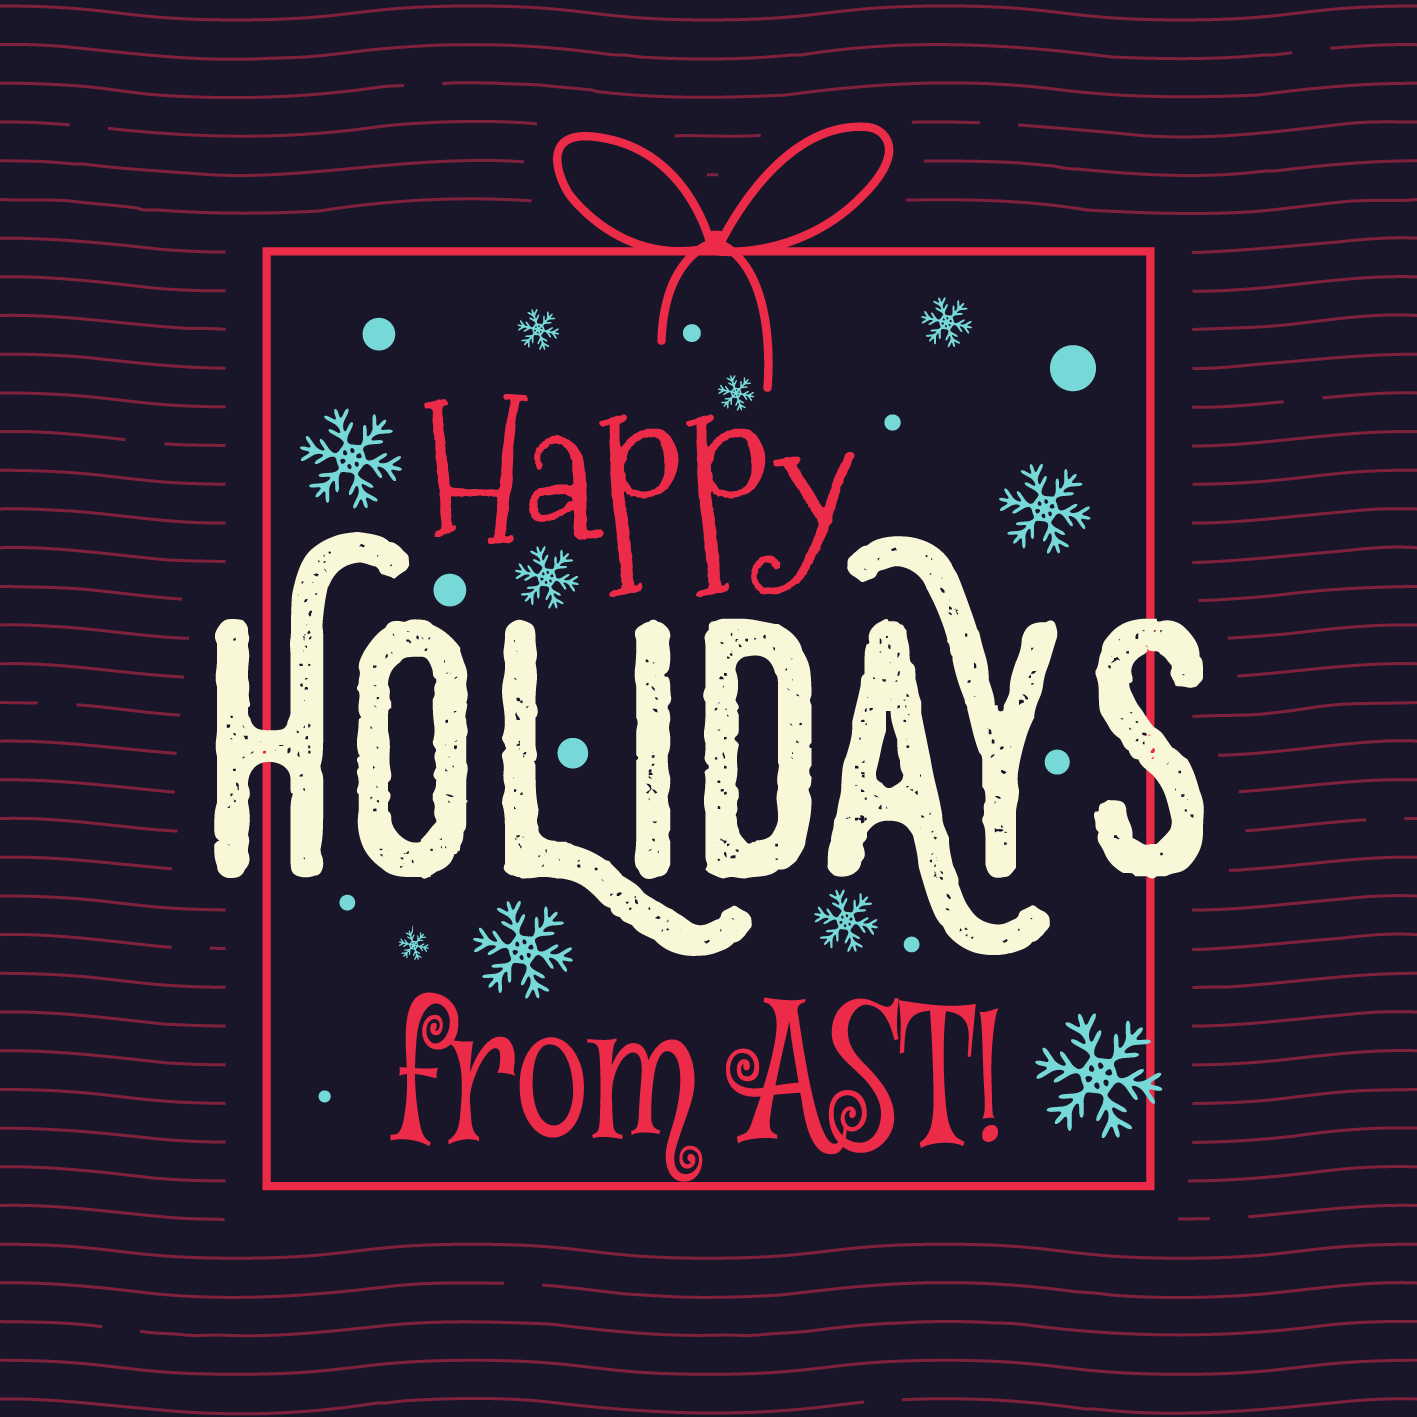 Happy Holidays from AST Corporation!